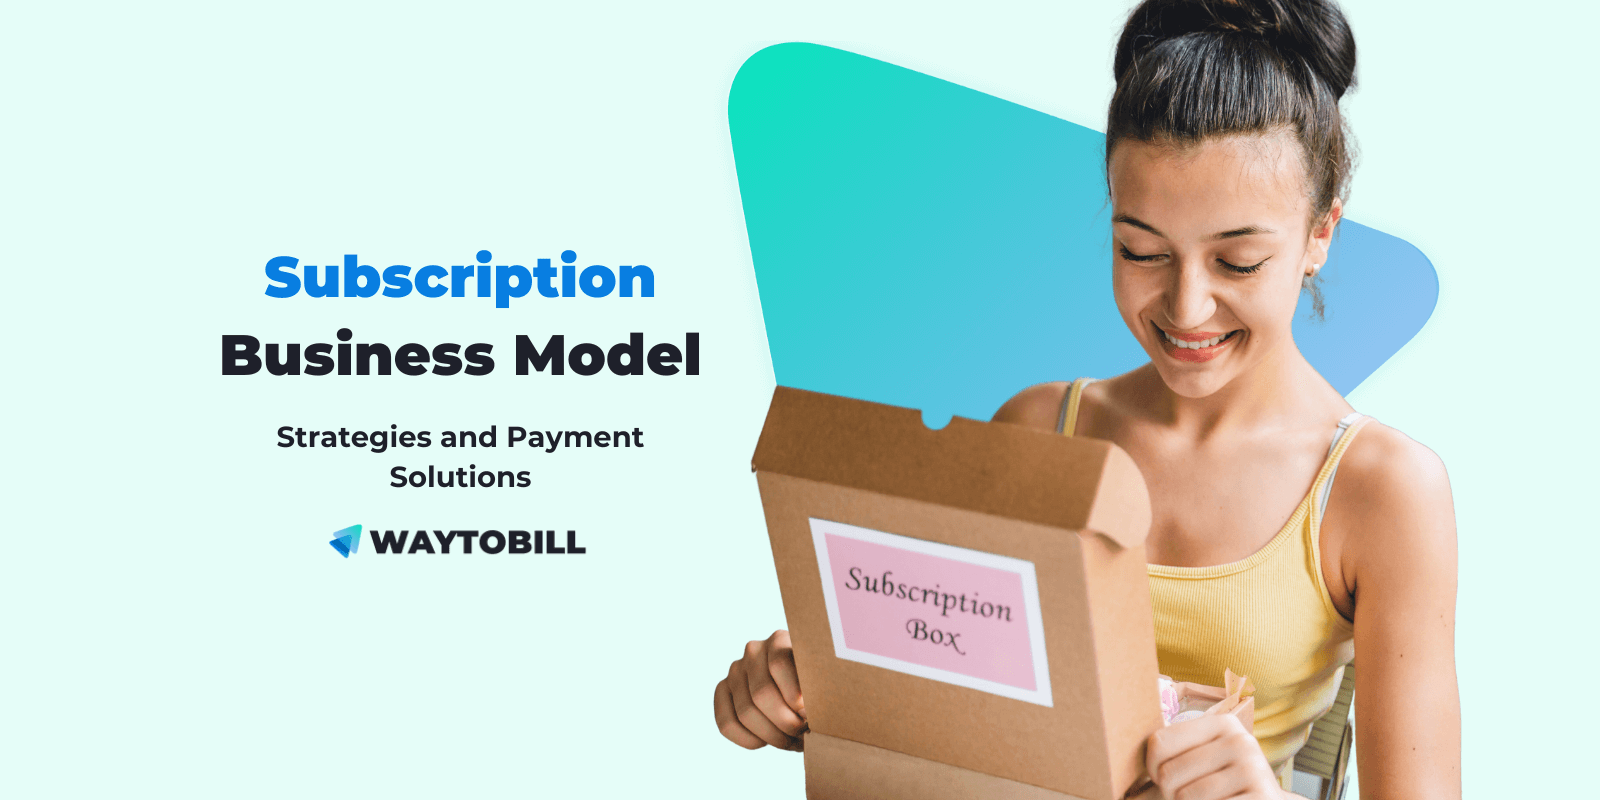 What are Subscription Business Models? Strategies & Payment Solutions